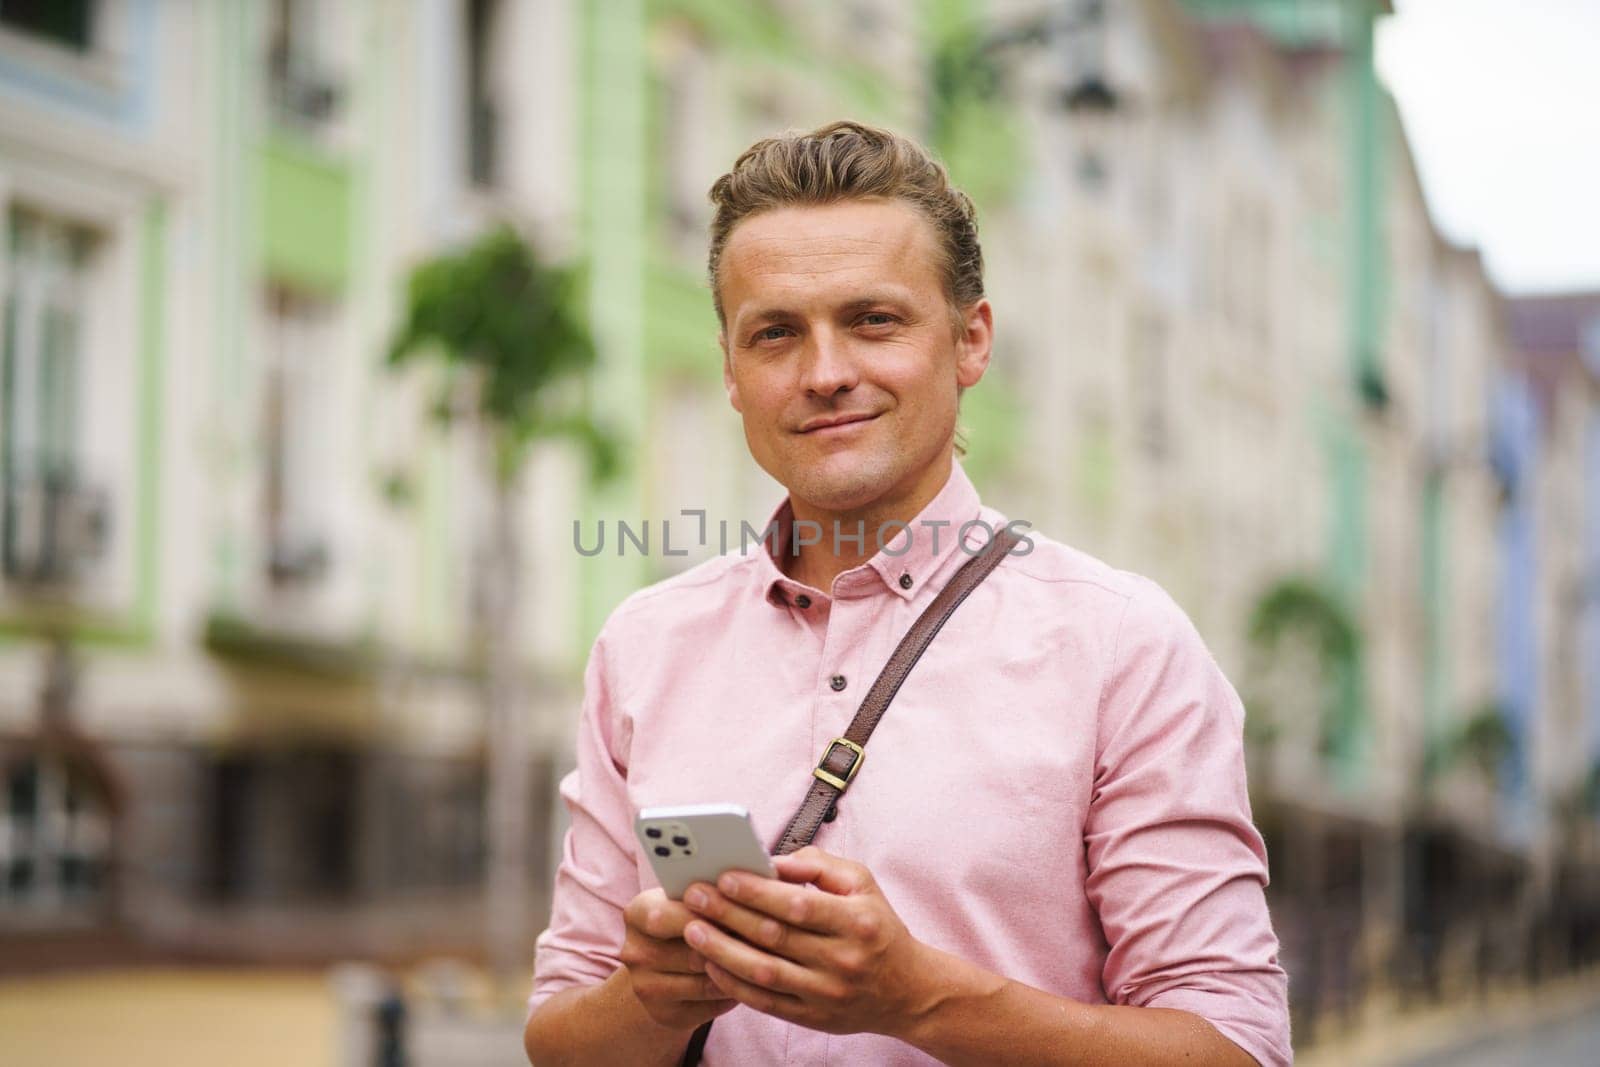 Mid aged man engaged in texting a message while being outdoors. With his mobile phone in hand, he utilizes digital communication to connect with others in the urban environment. by LipikStockMedia